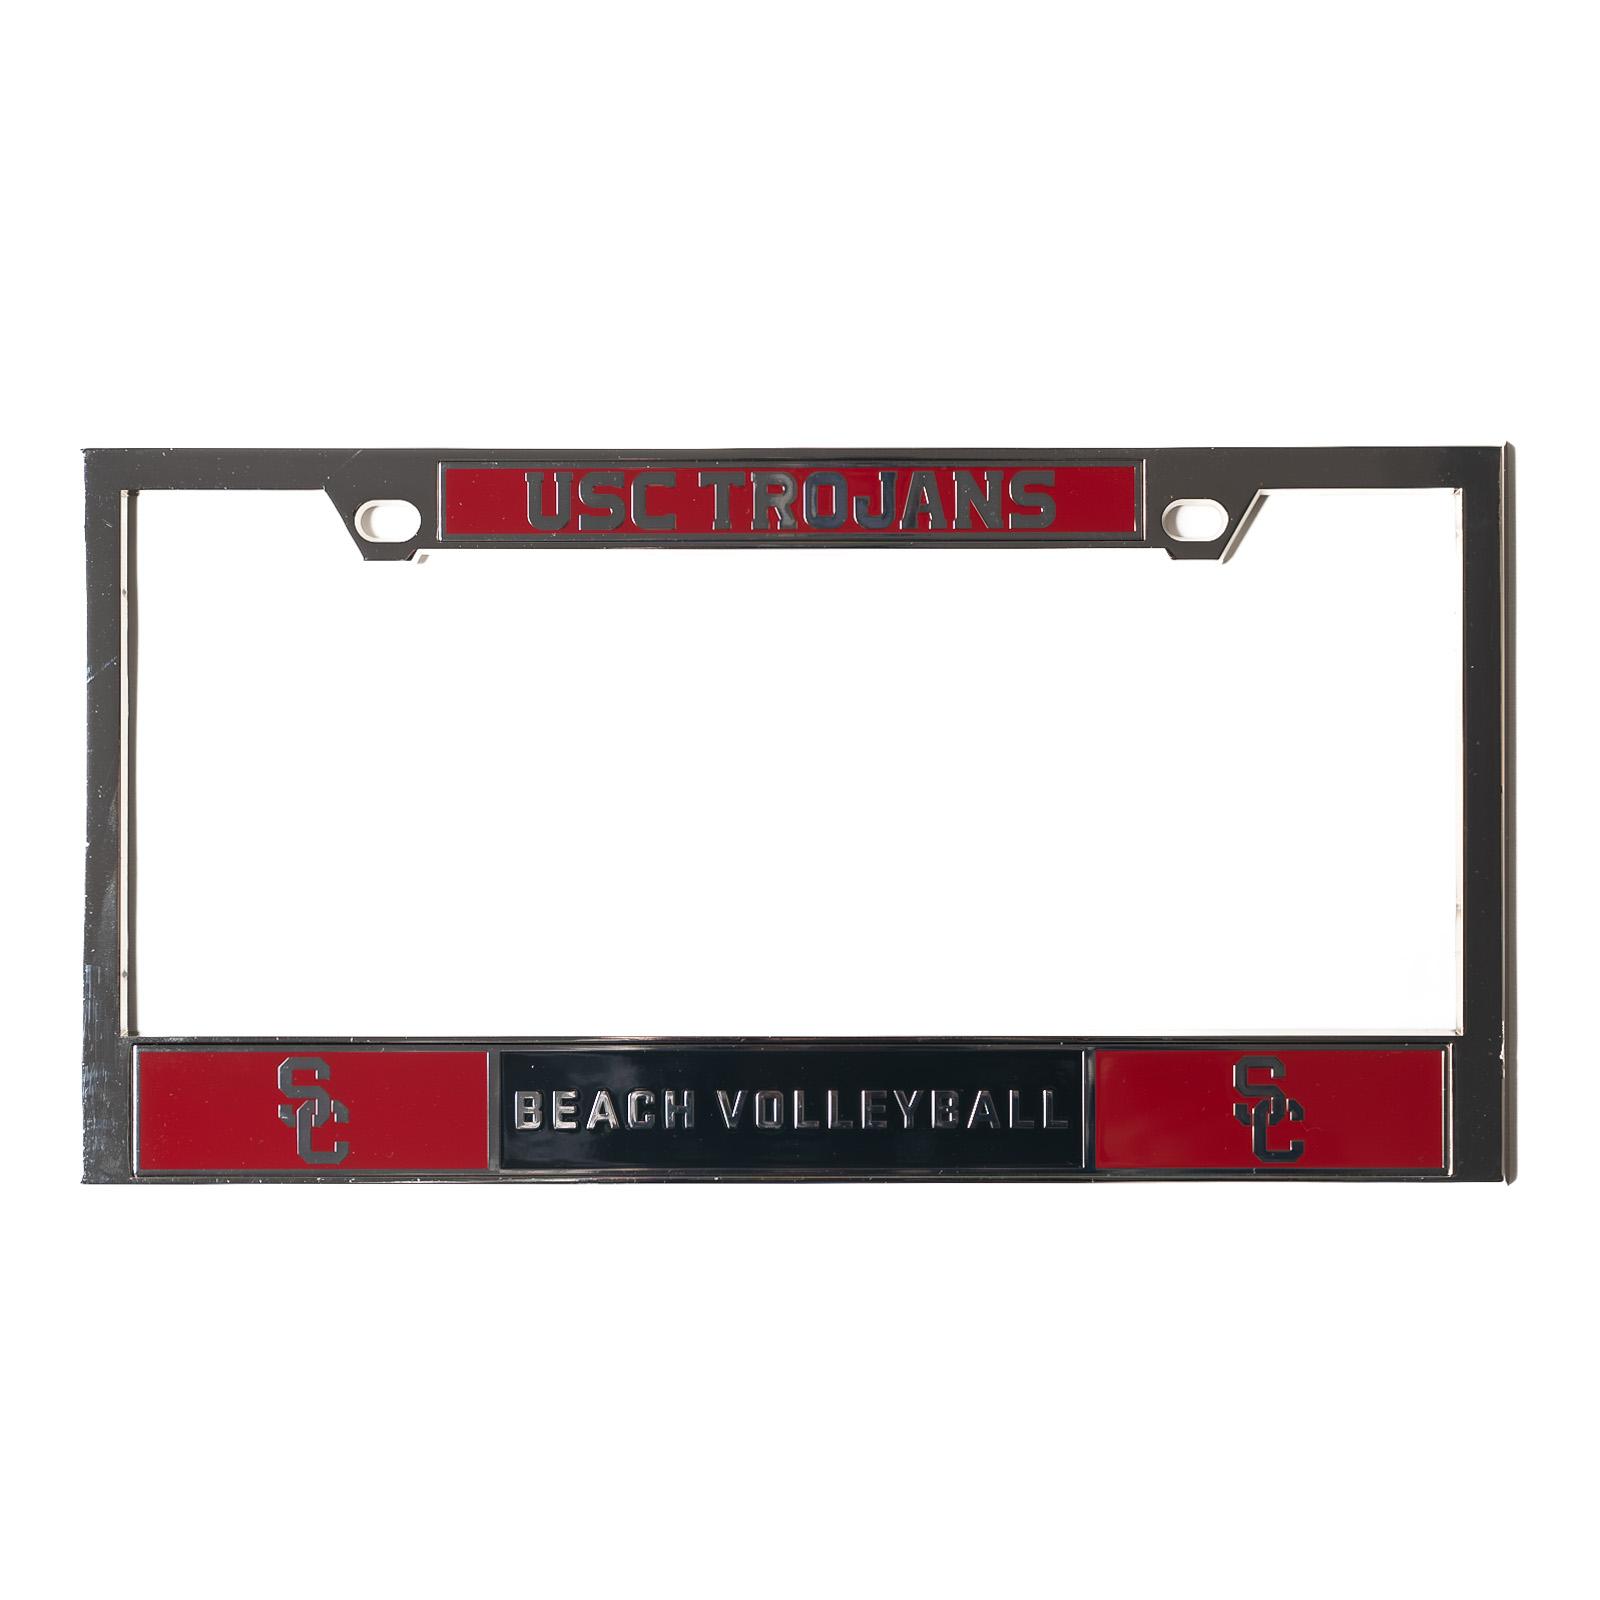 SC Interlock Beach Volleyball License Plate Frame Chrome by The U Apparel & Gifts image01